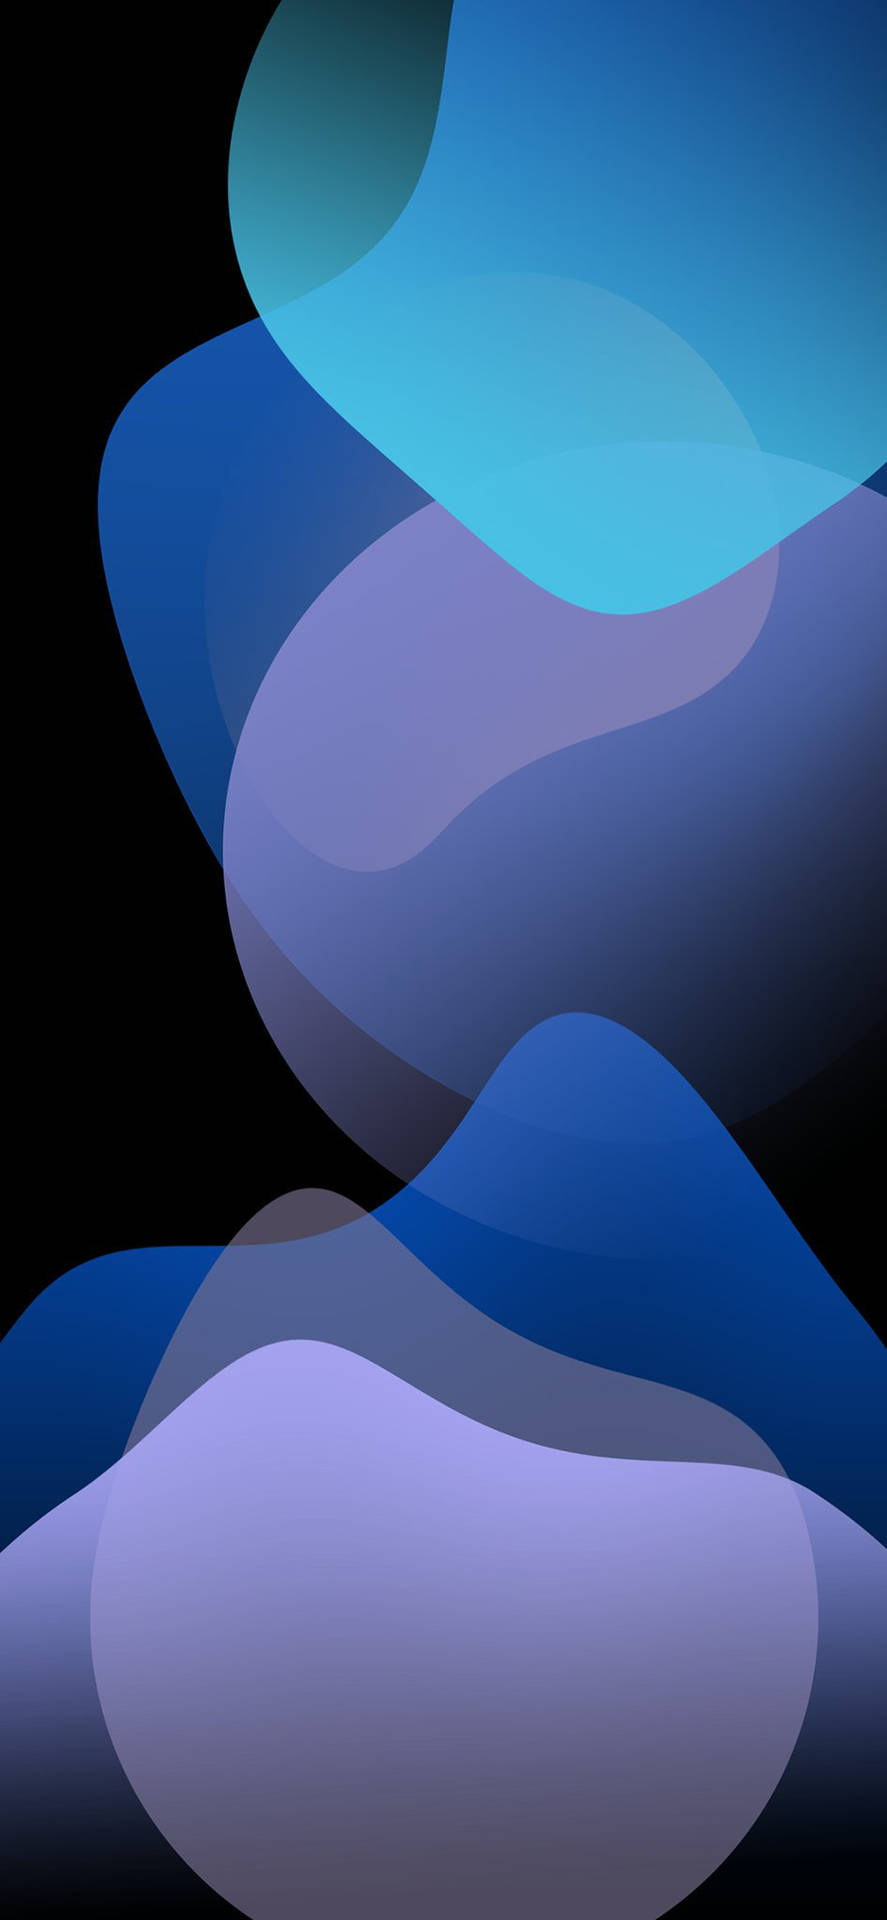 Iphone 12 Stock Blue Violet Blobs Background